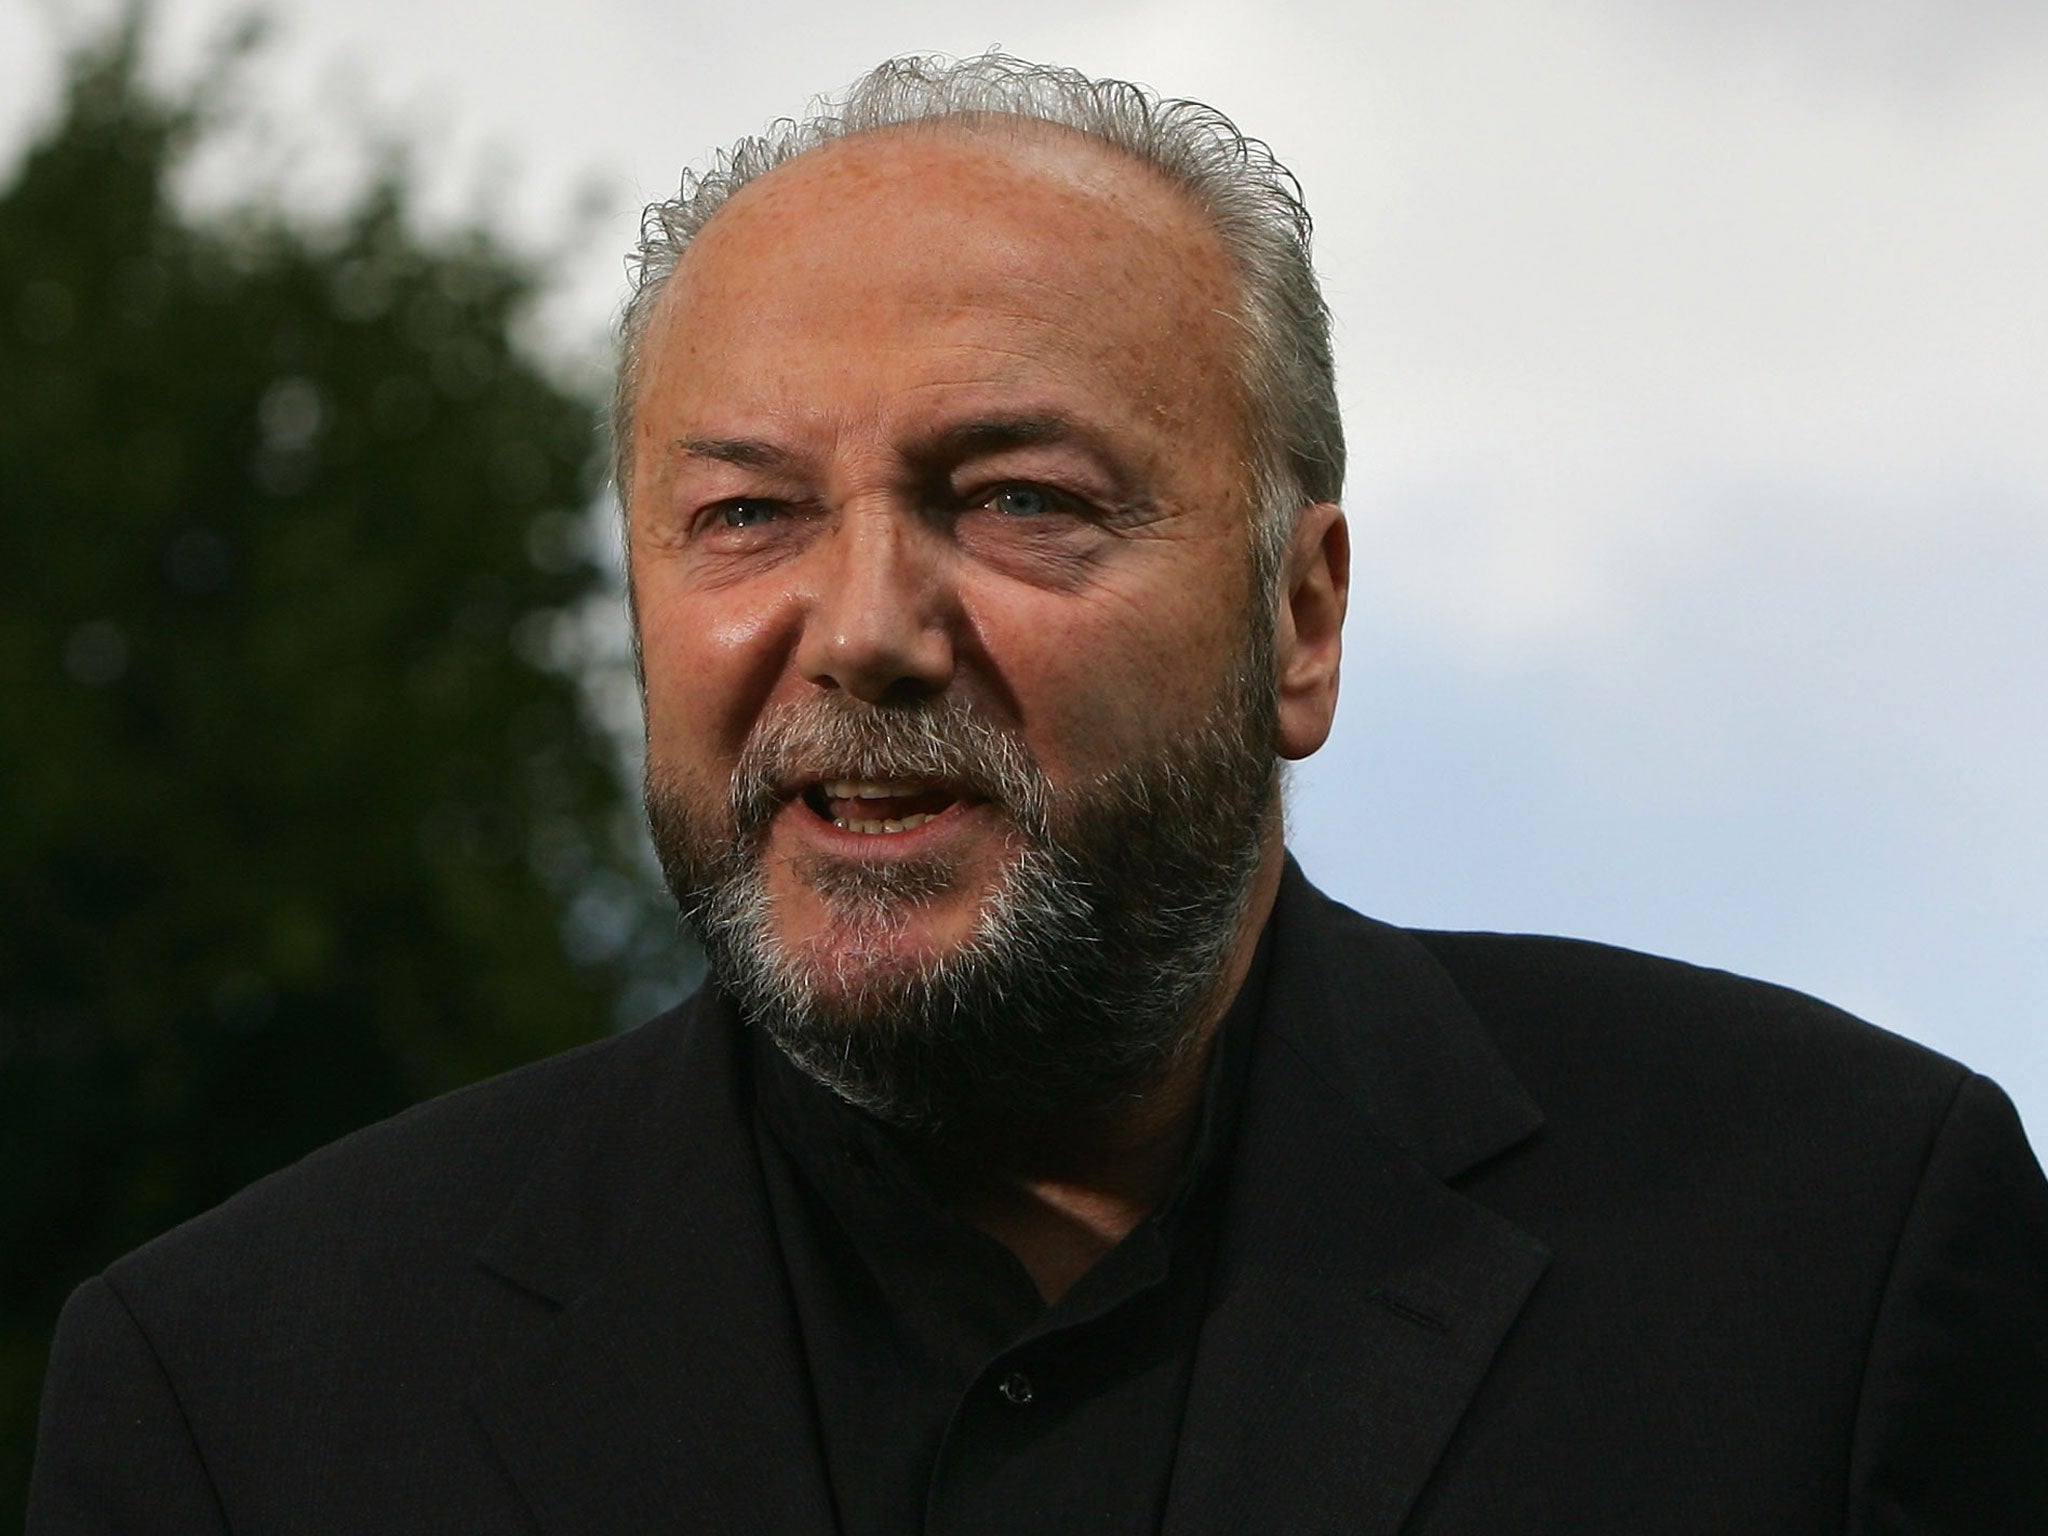 Mr Galloway was thrown out of the Labour party in 2003